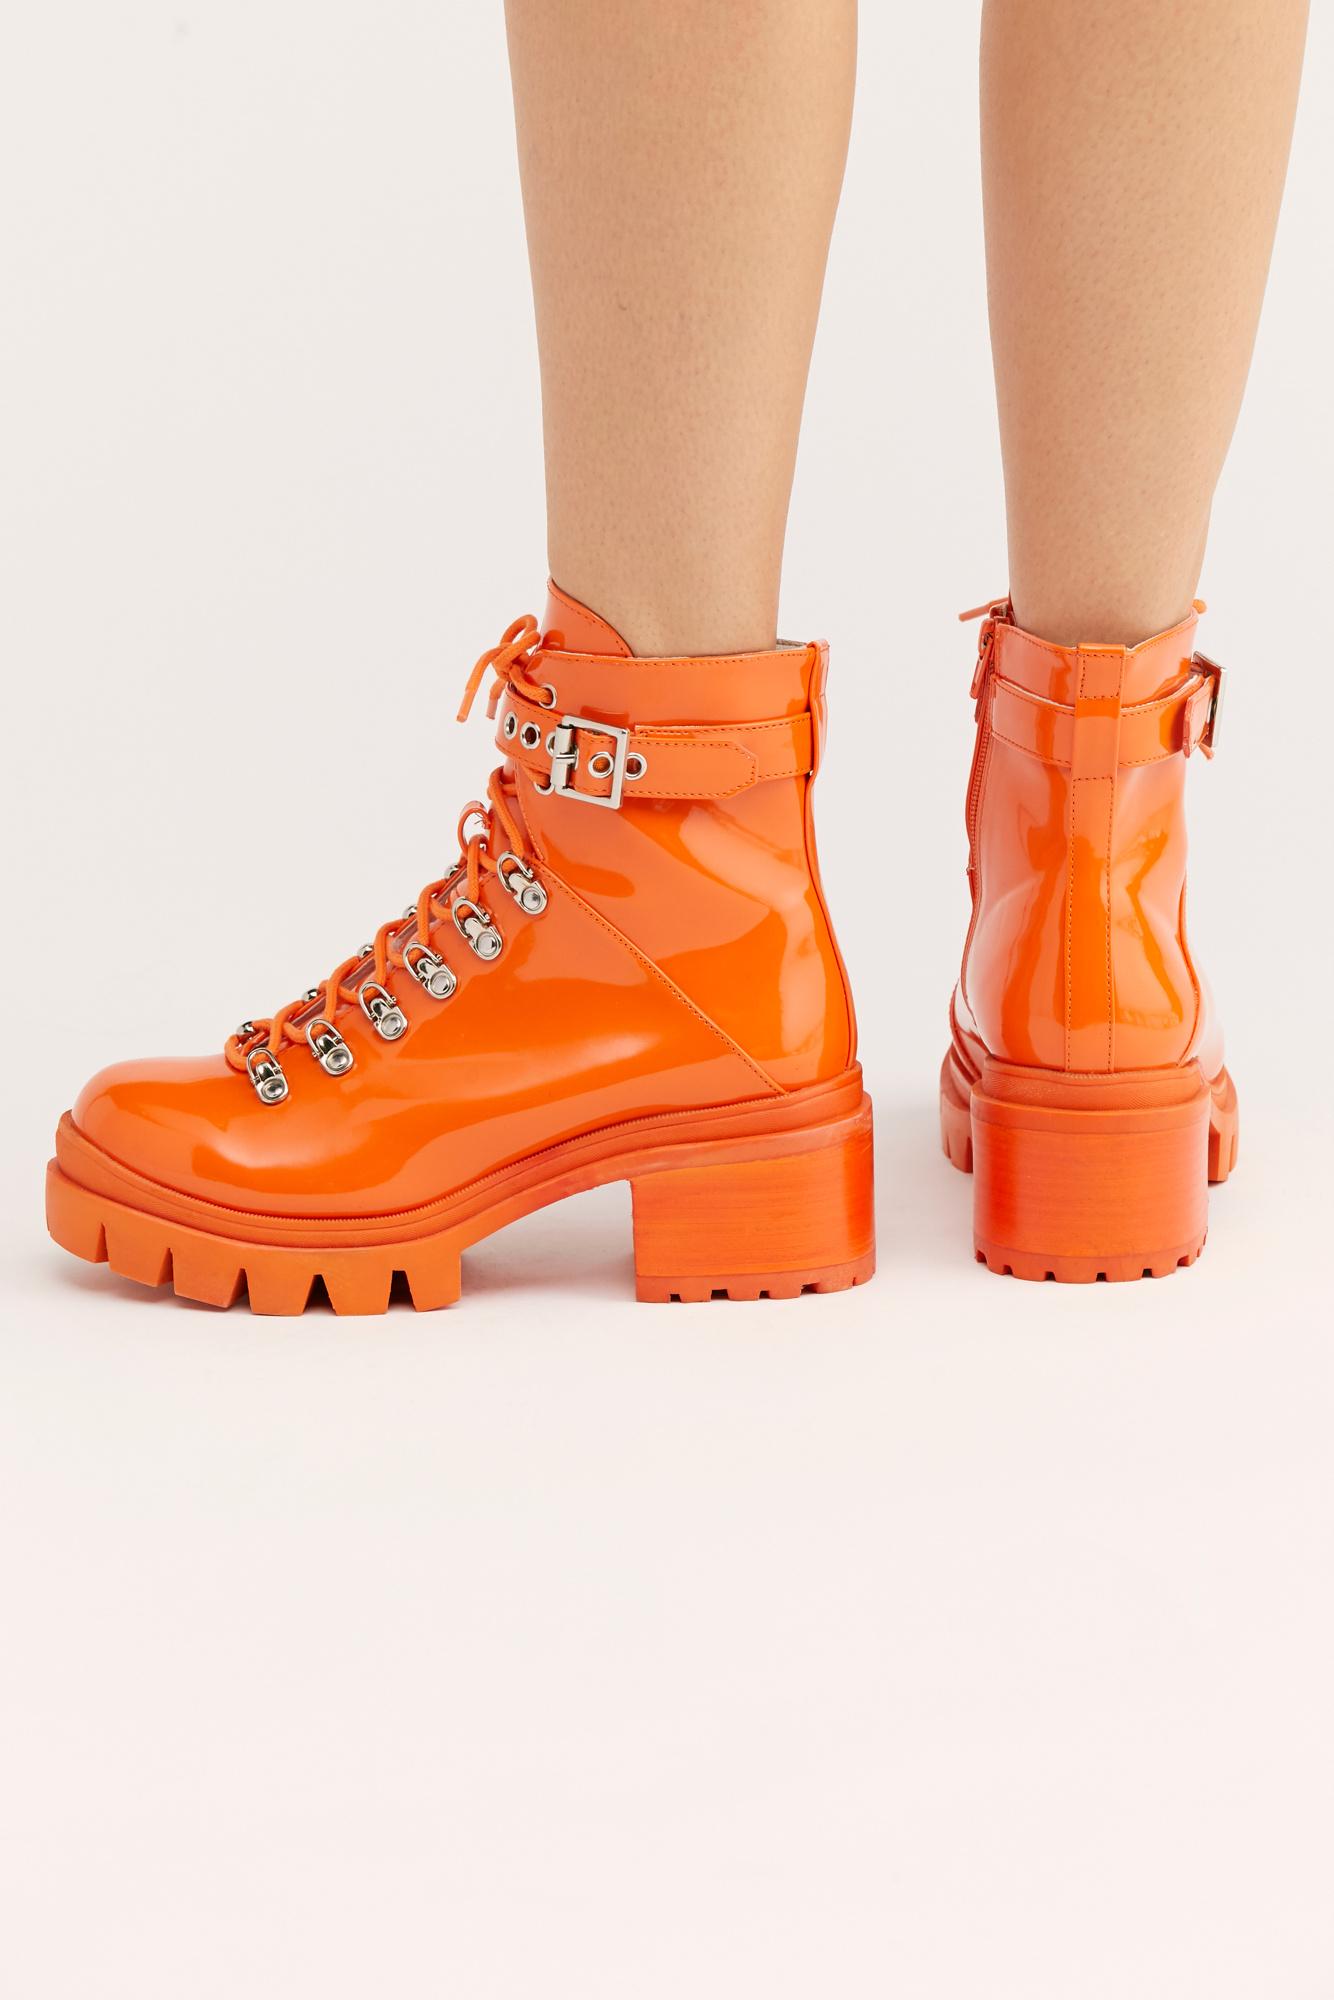 Free People Check Lace-up Boot By Jeffrey Campbell in Orange | Lyst